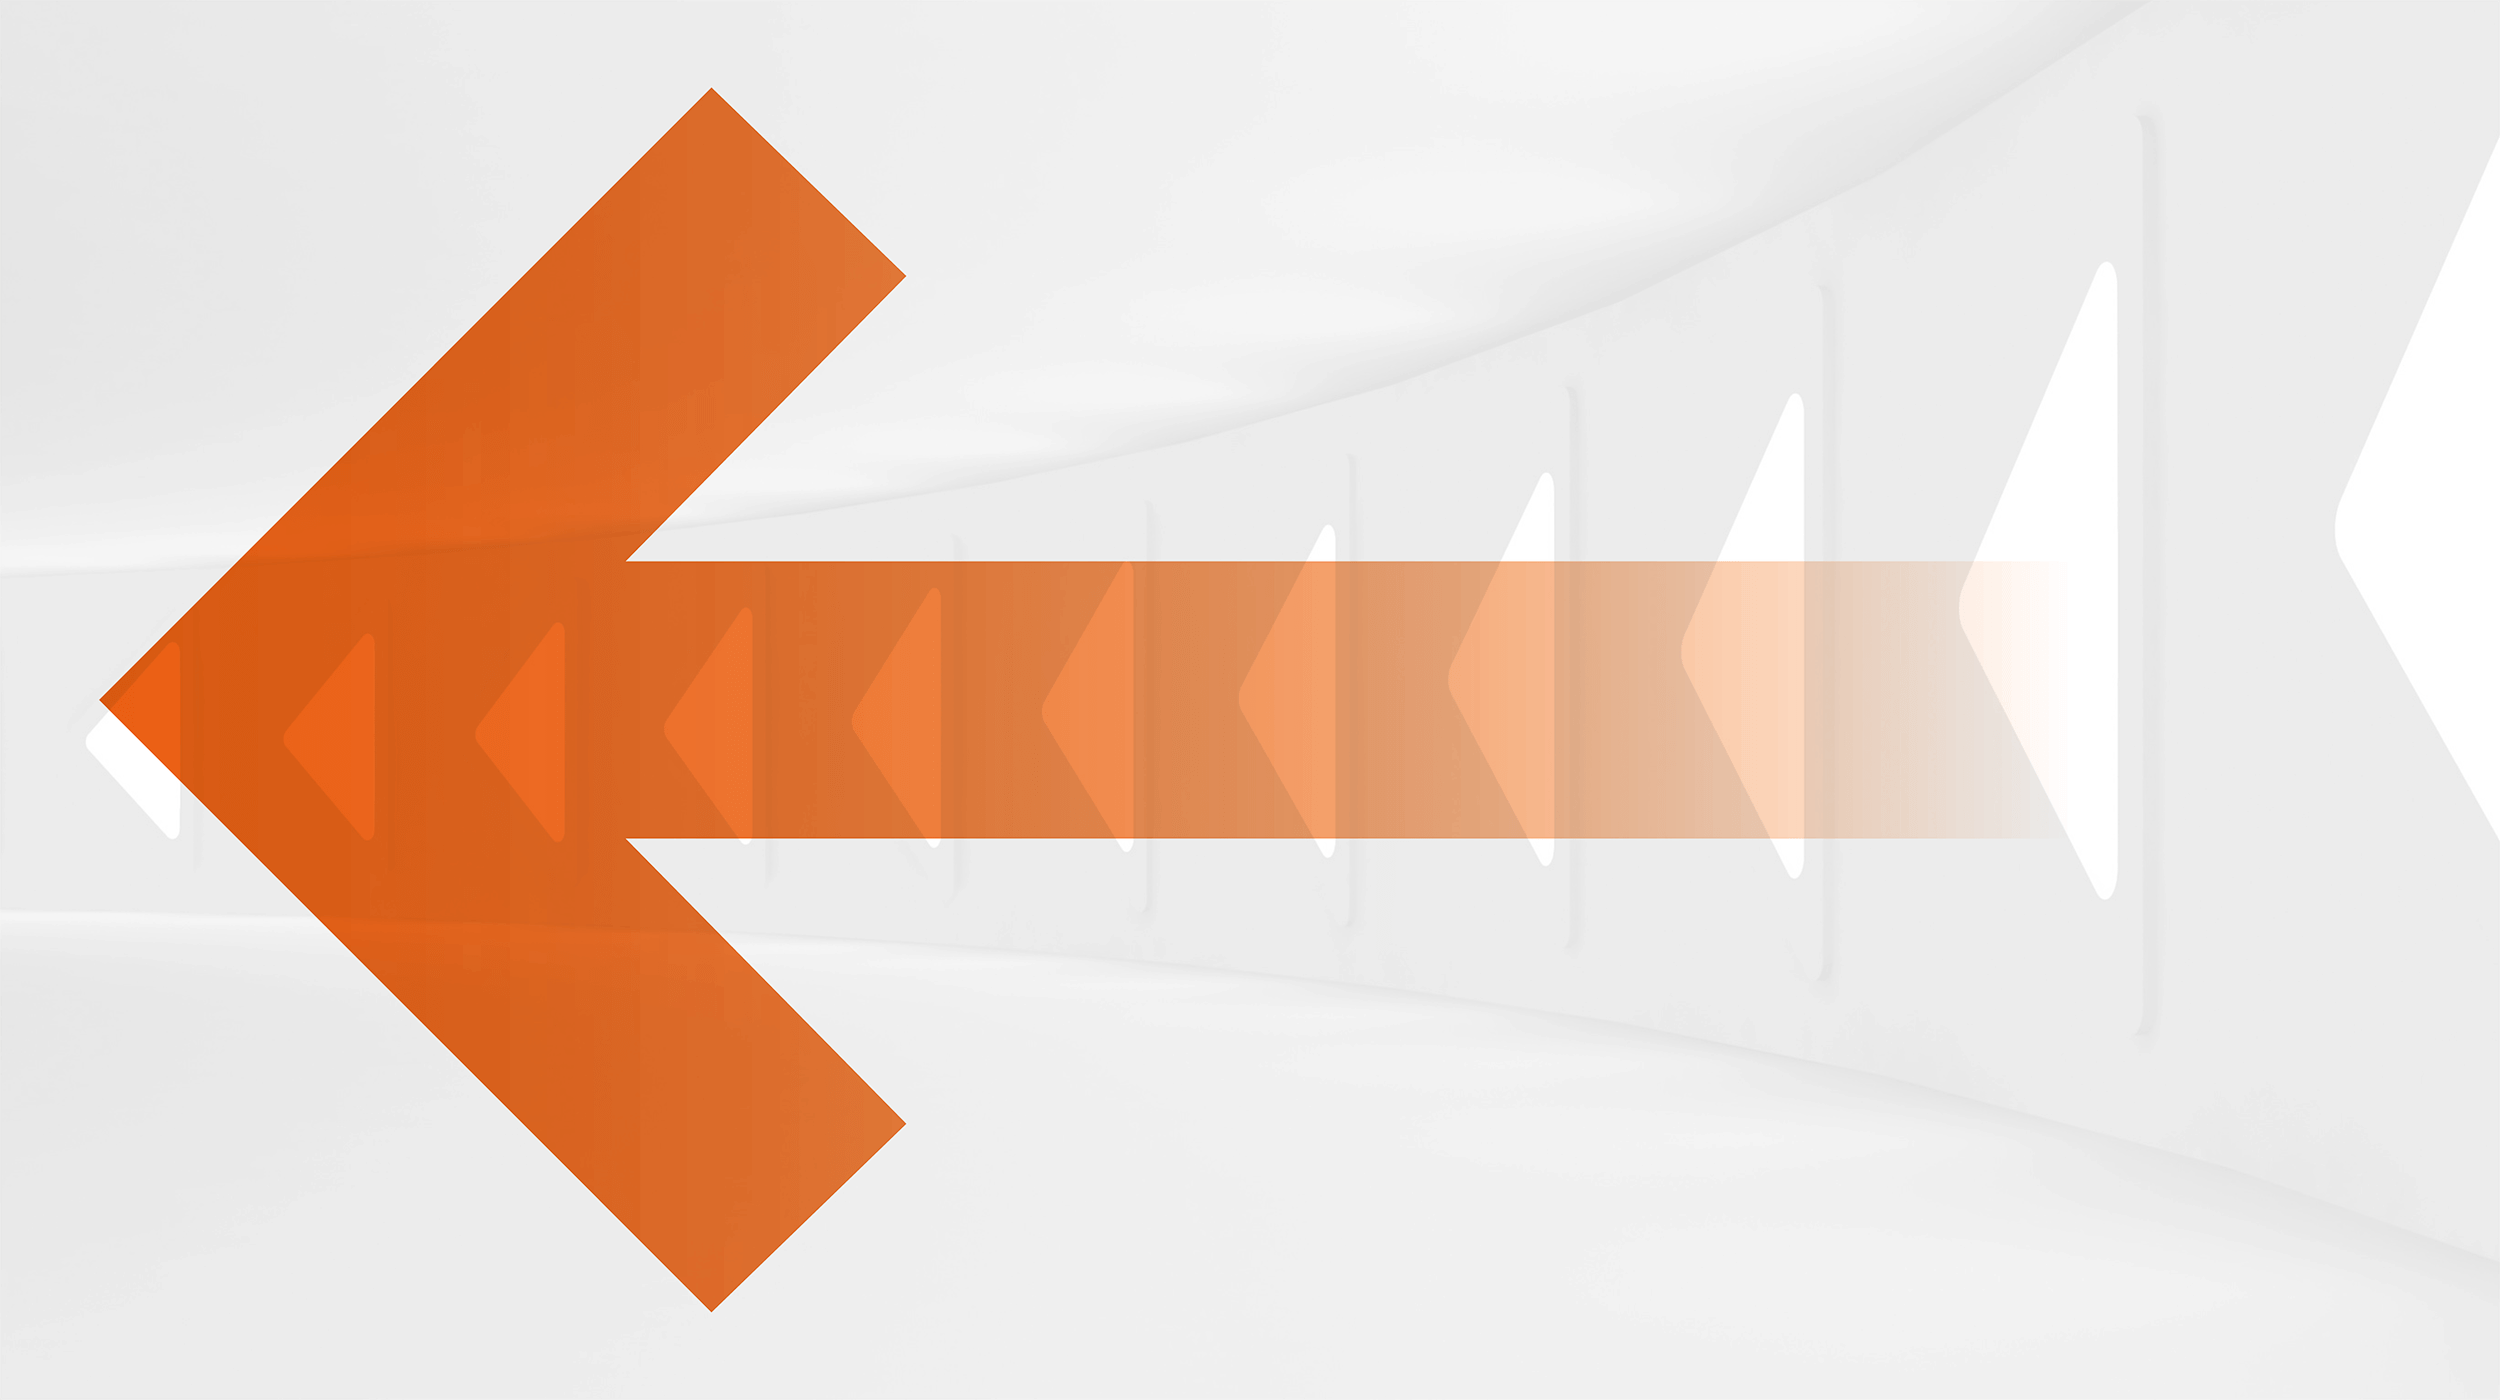 Large orange arrow pointing to the right, on a white and grey background